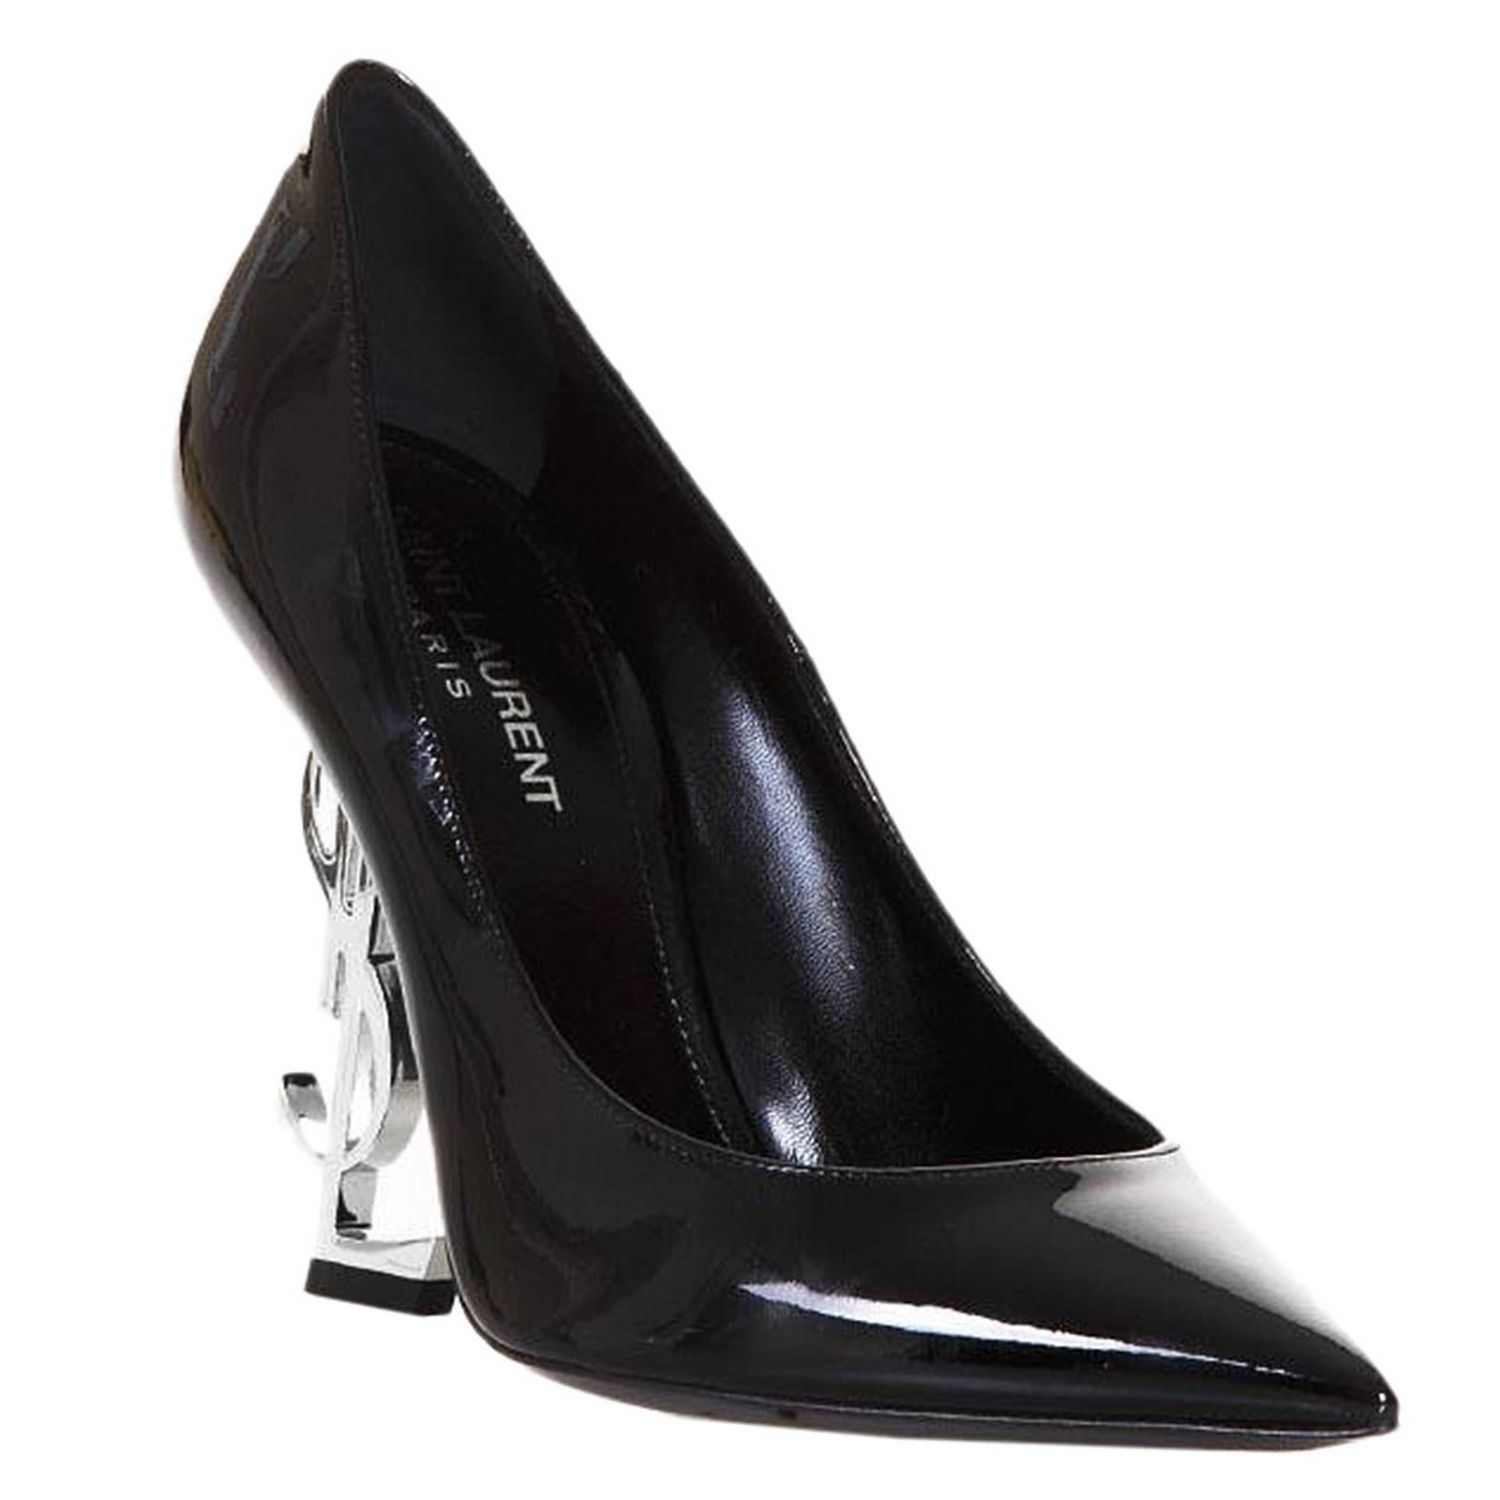 SAINT LAURENT: YSL Opyum shoes pumps in patent leather with 